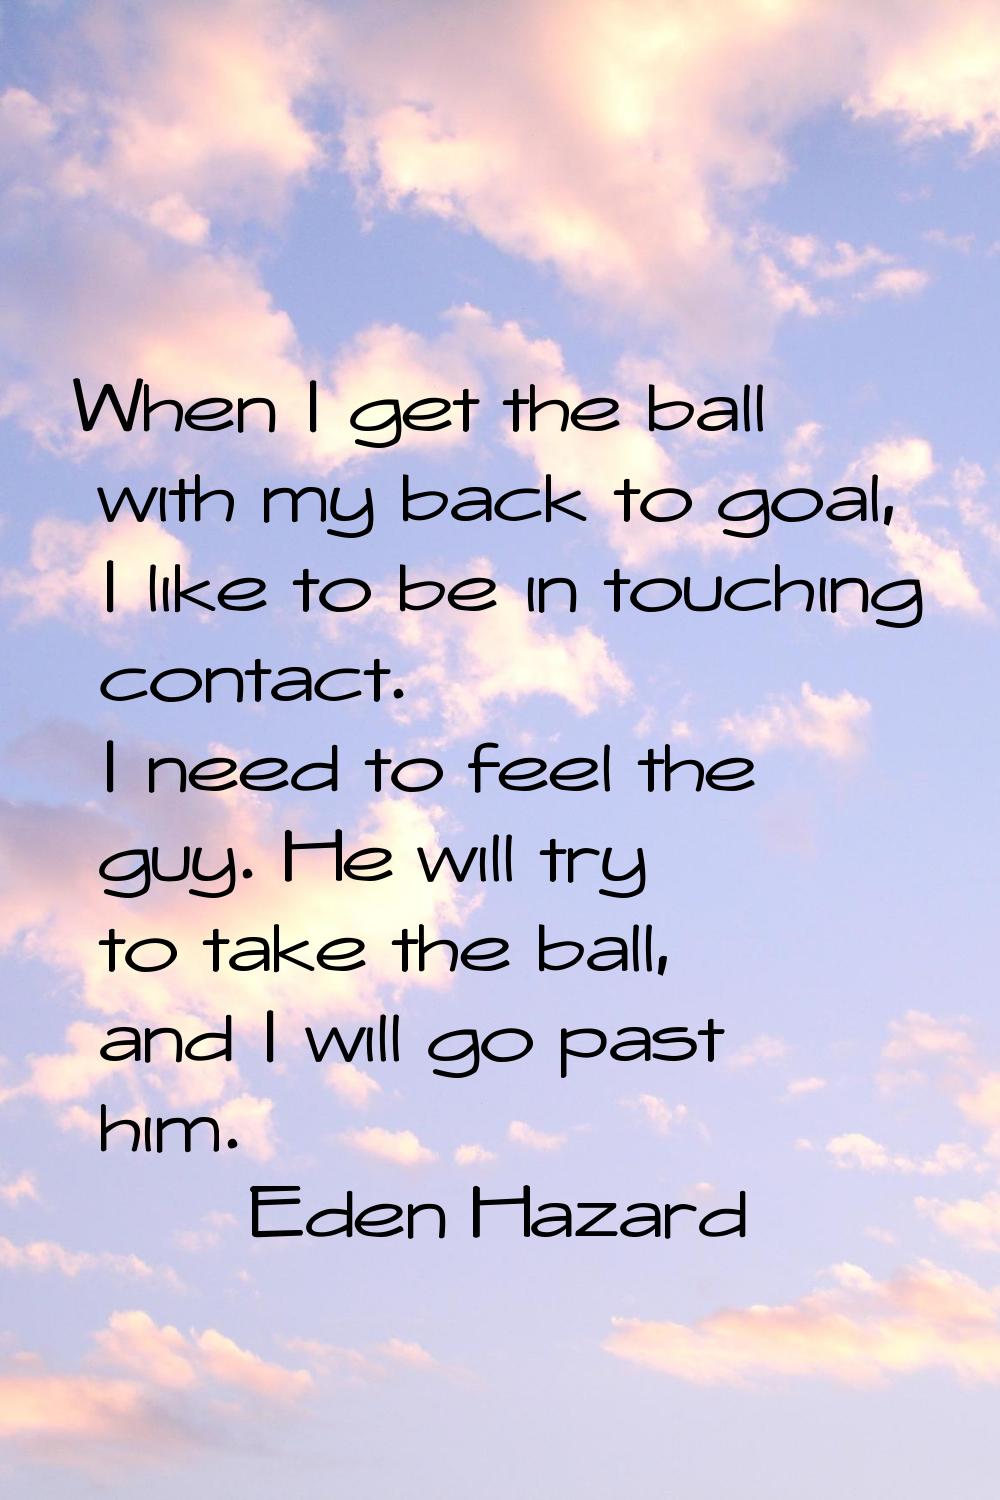 When I get the ball with my back to goal, I like to be in touching contact. I need to feel the guy.